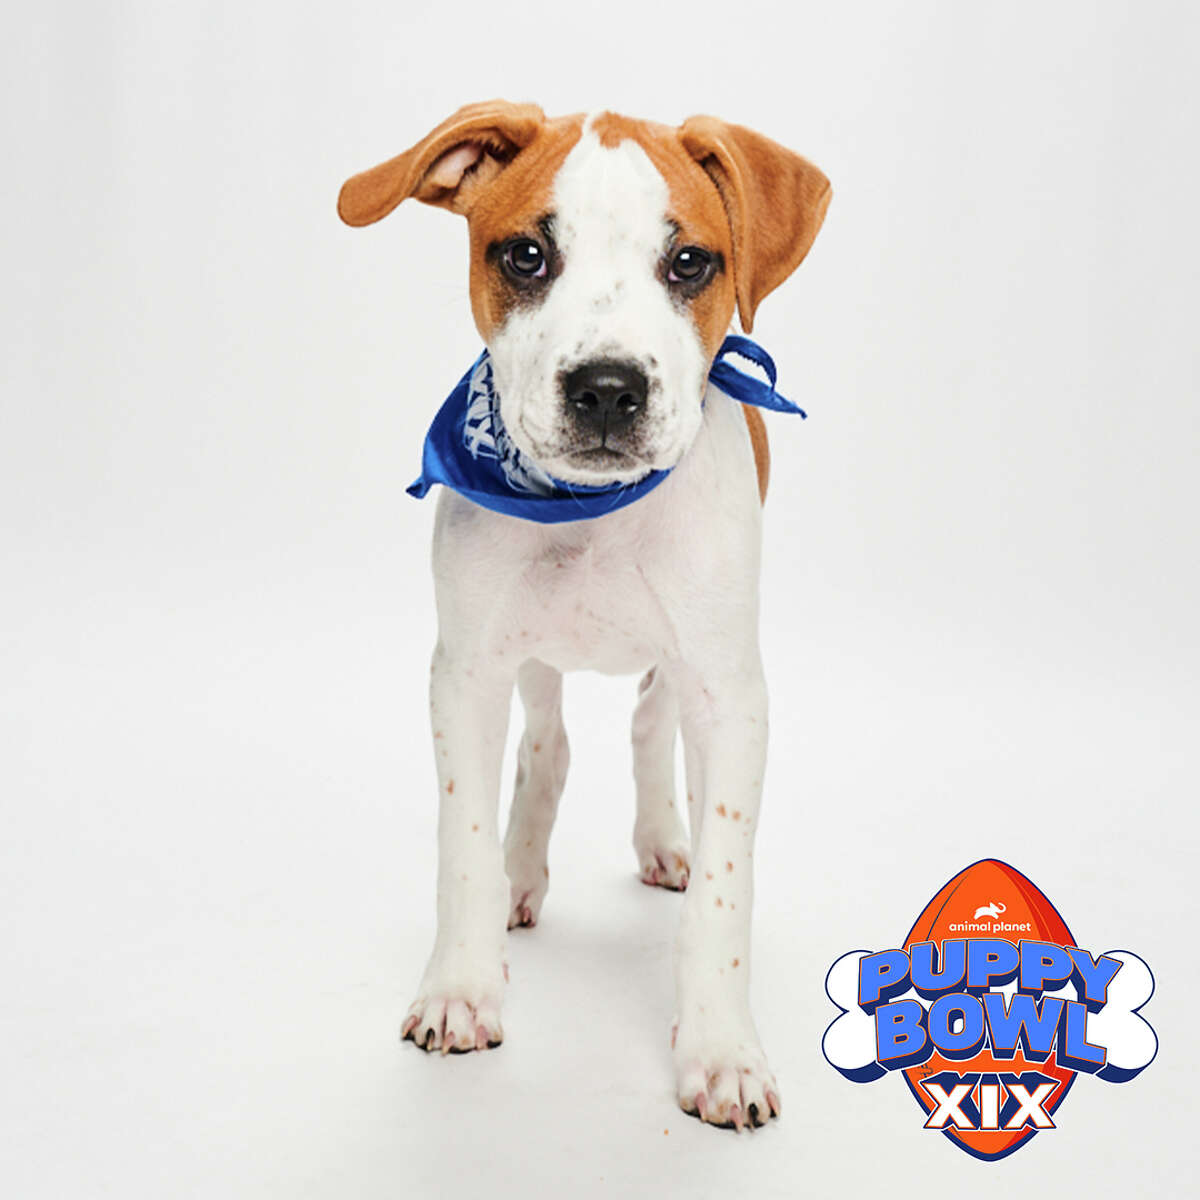 Archer from Dog Star Rescue will play in this year's Puppy Bowl on Sunday, Feb. 12.